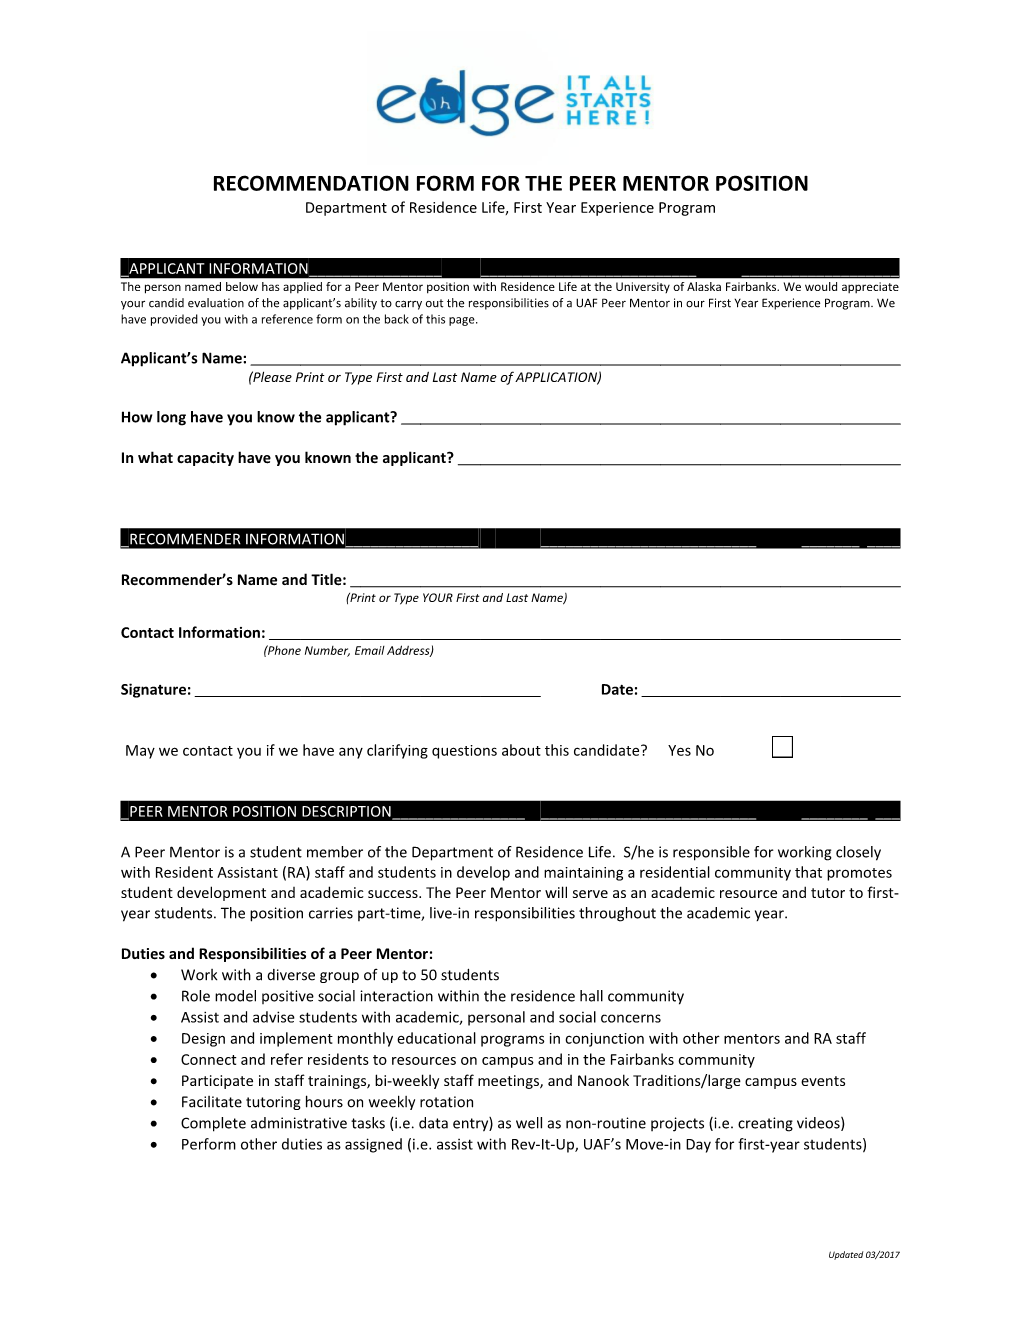 Recommendation Form for the Peer Mentor Position